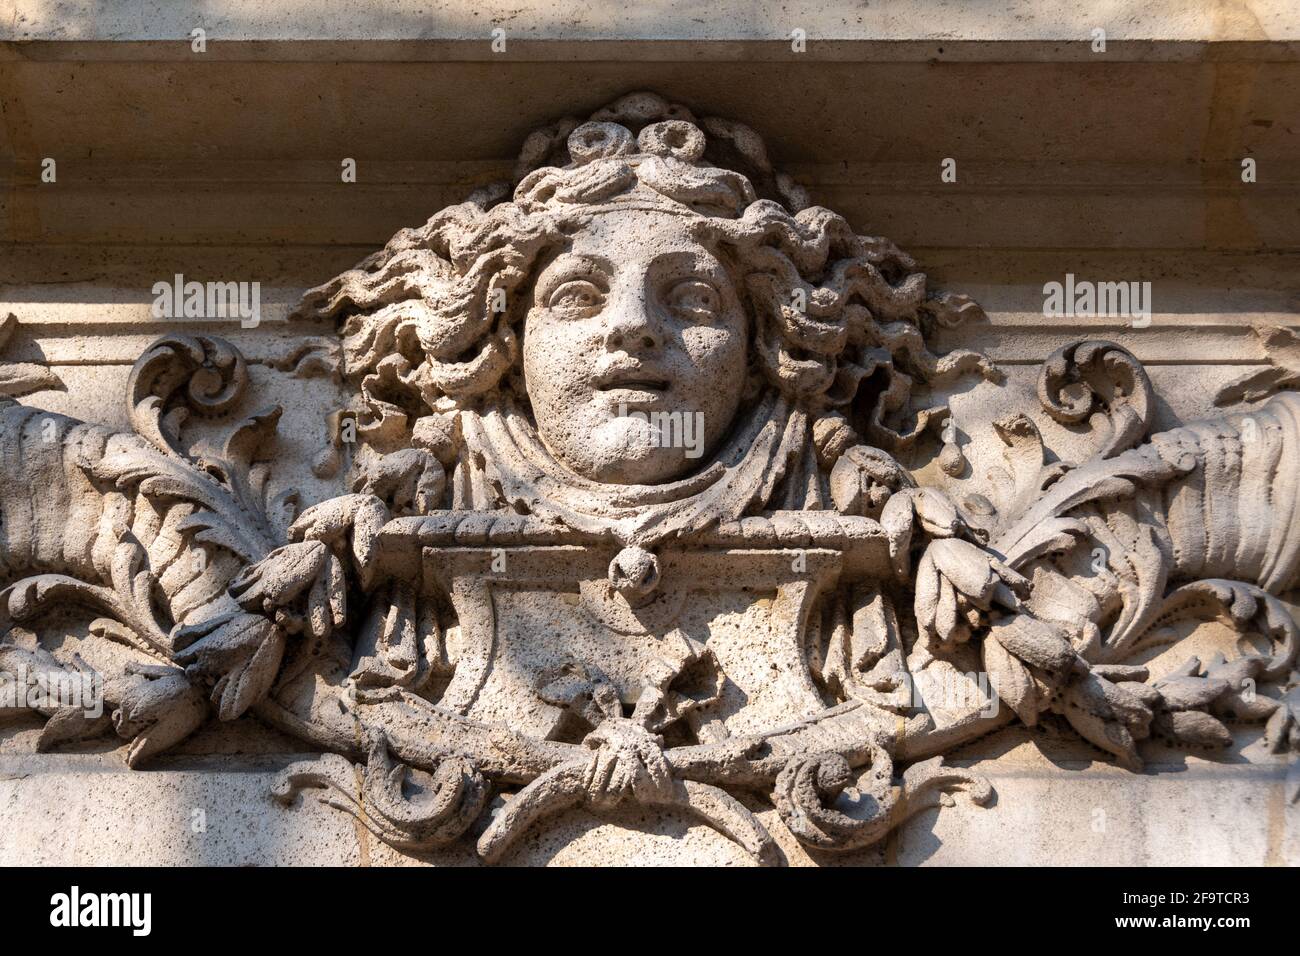 Woman's face carved in stone, probably an allegory of fortune, facade ornament of an old building in Paris, France Stock Photo